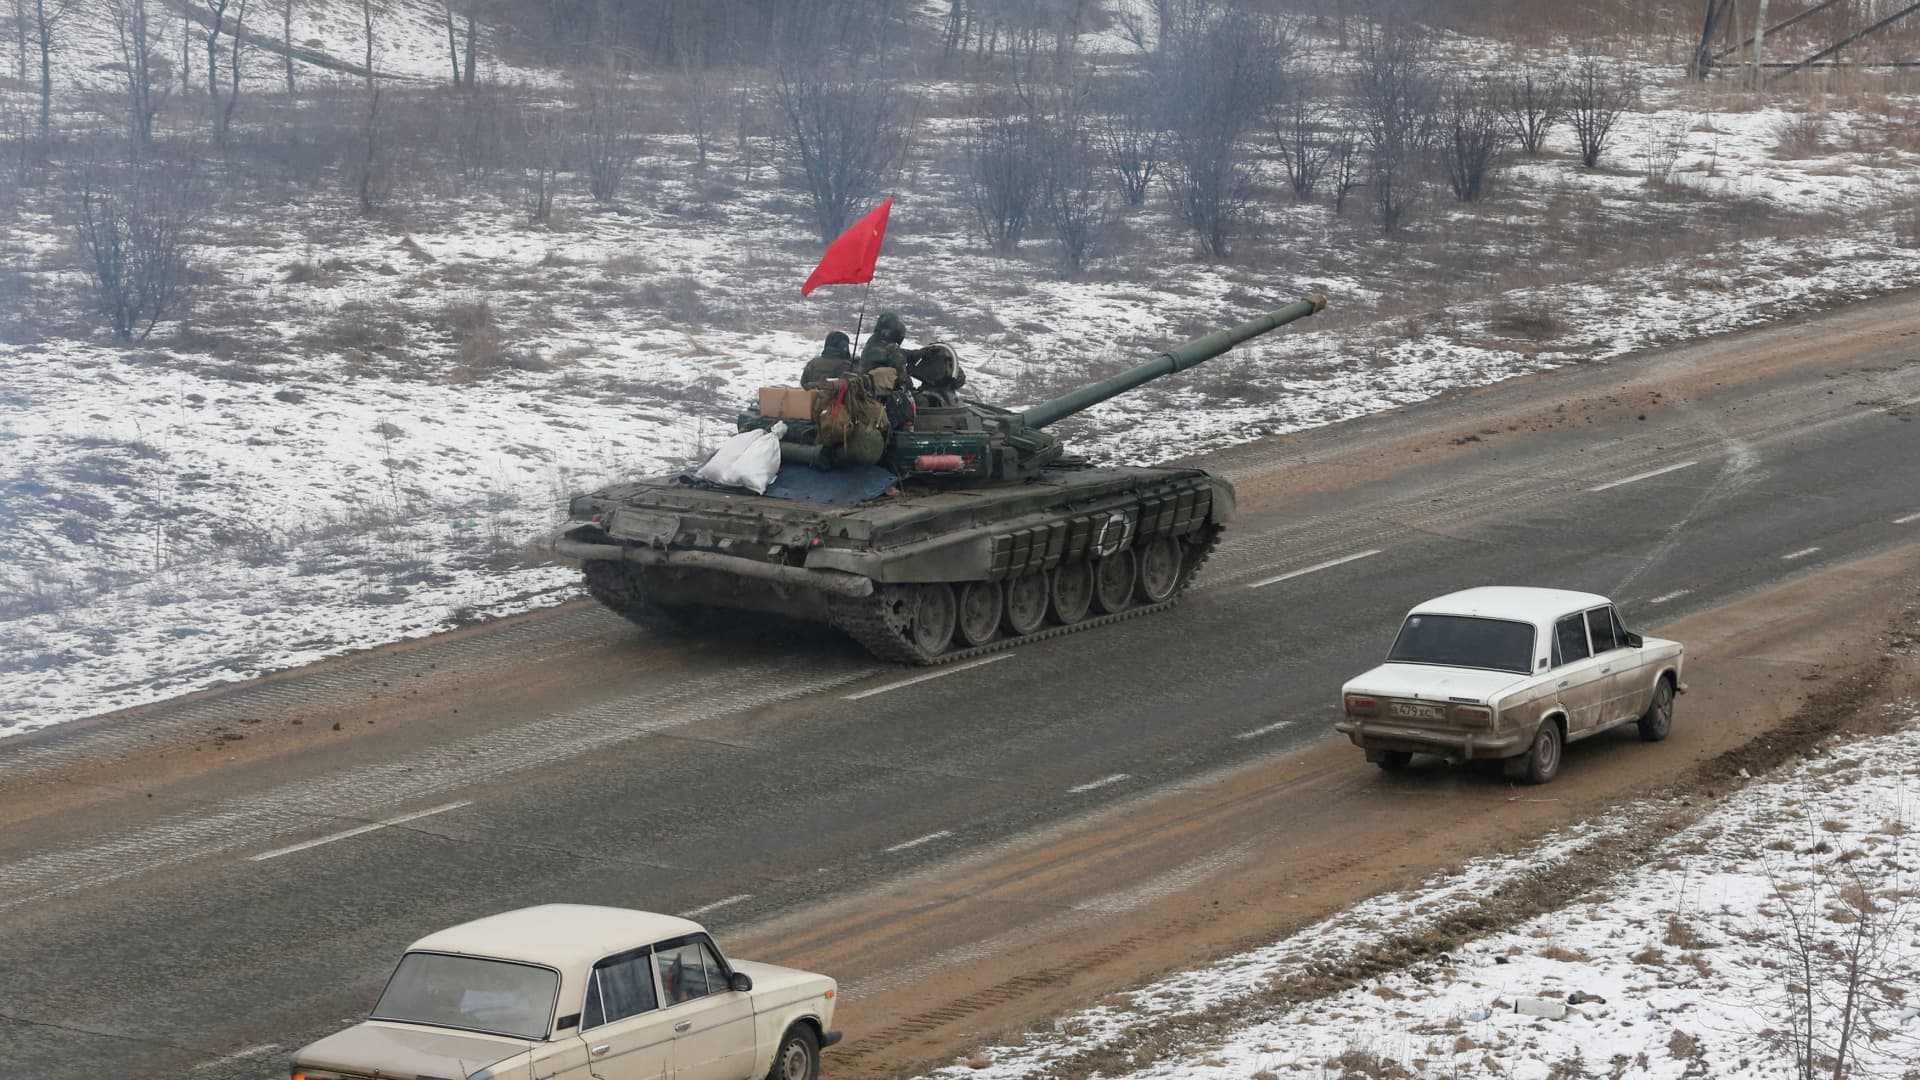 Service members of pro-Russian troops in uniforms without insignia drive a tank during Ukraine-Russia conflict on the outskirts of separatist-controlled city of Donetsk, Ukraine March 5, 2022.